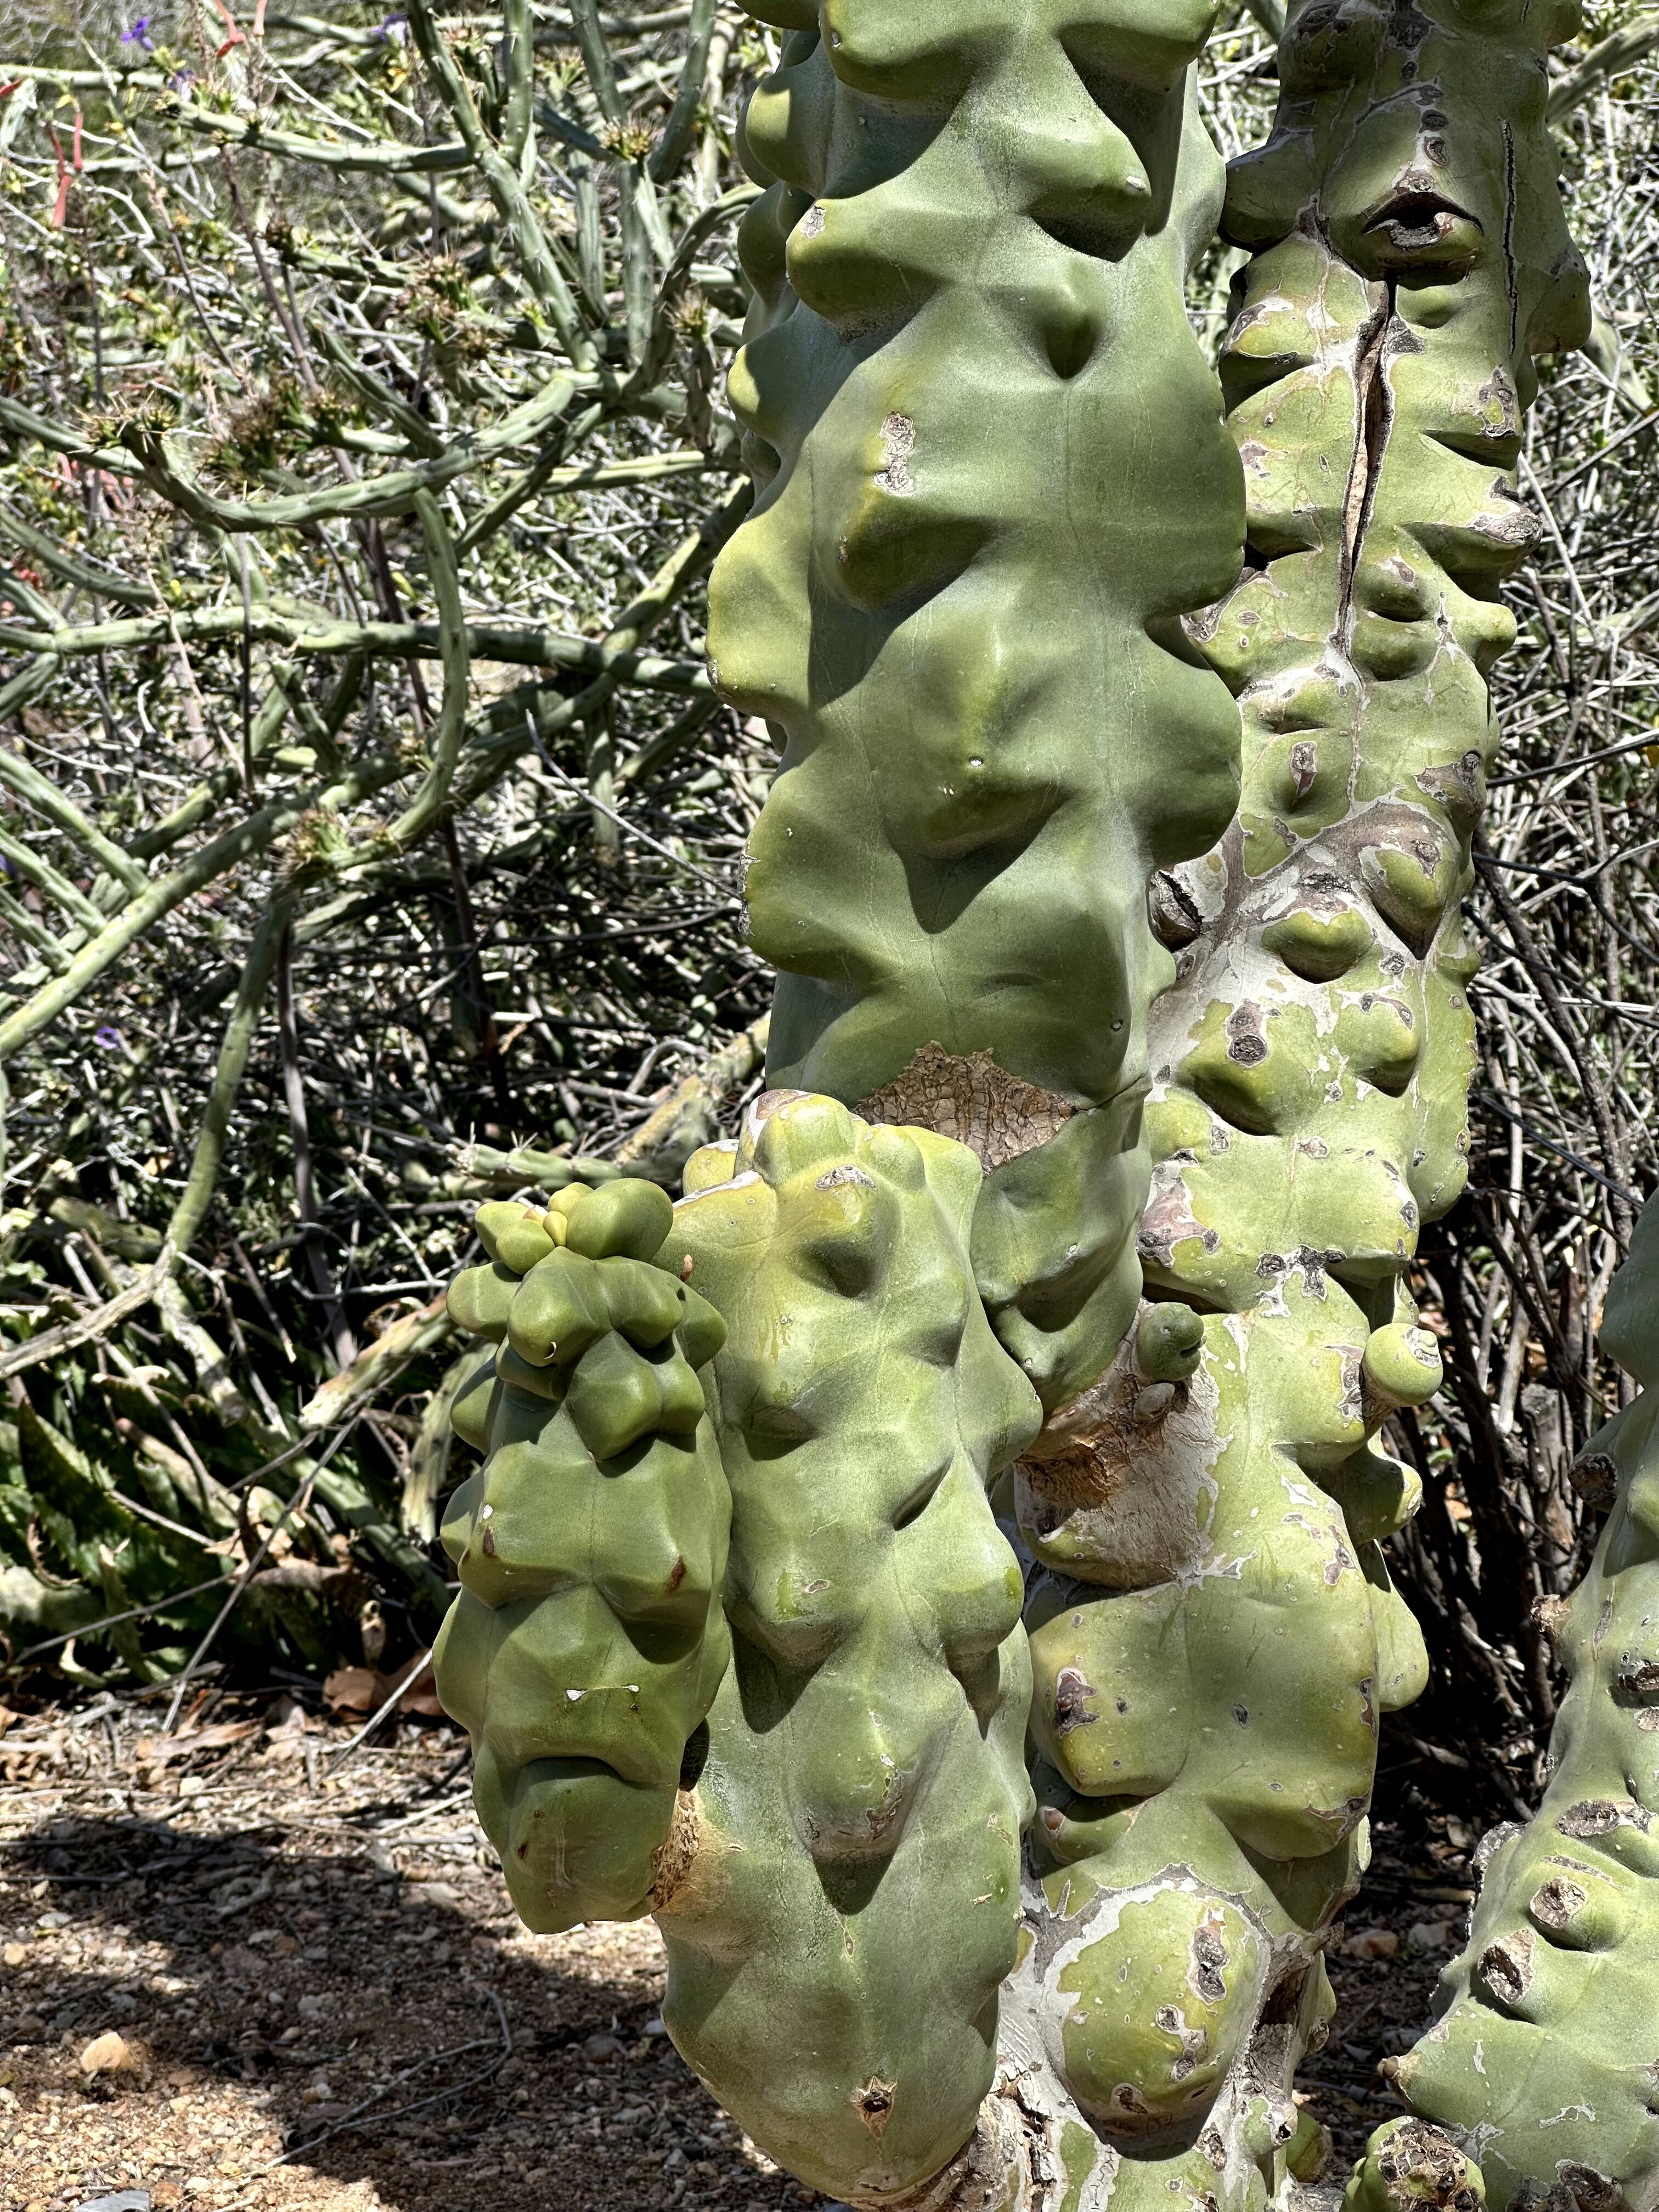 A green cactus of several vertical tubes, with large chunky smooth protrusions